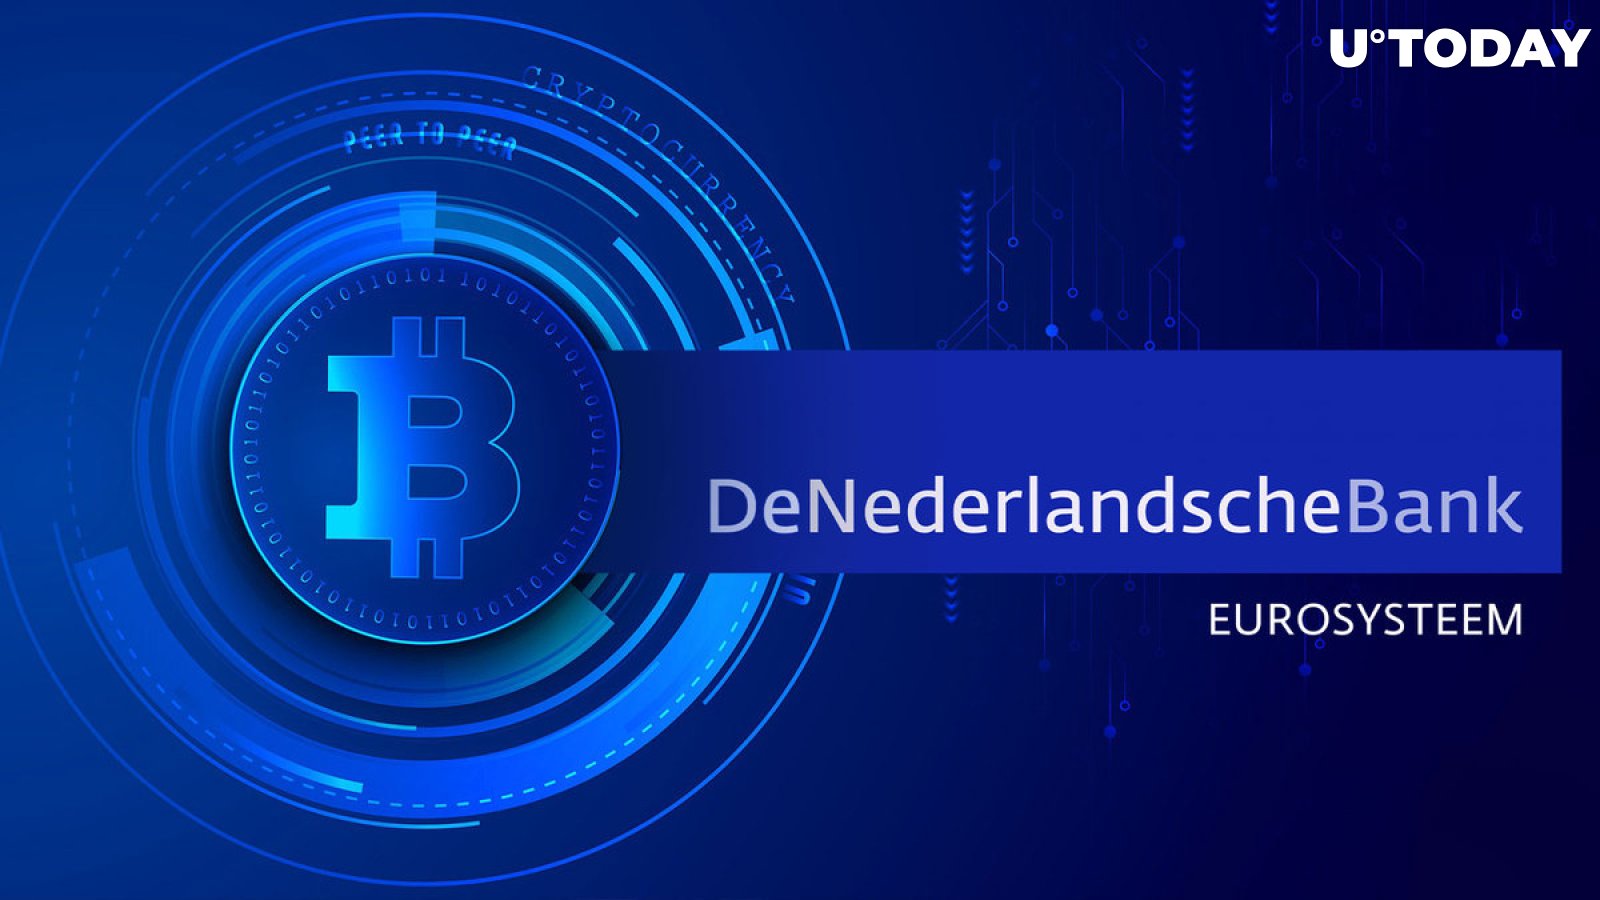 Bitcoin (BTC) Fixes This: Here's How Dutch Bank Spent Weeks on Regular Transfer